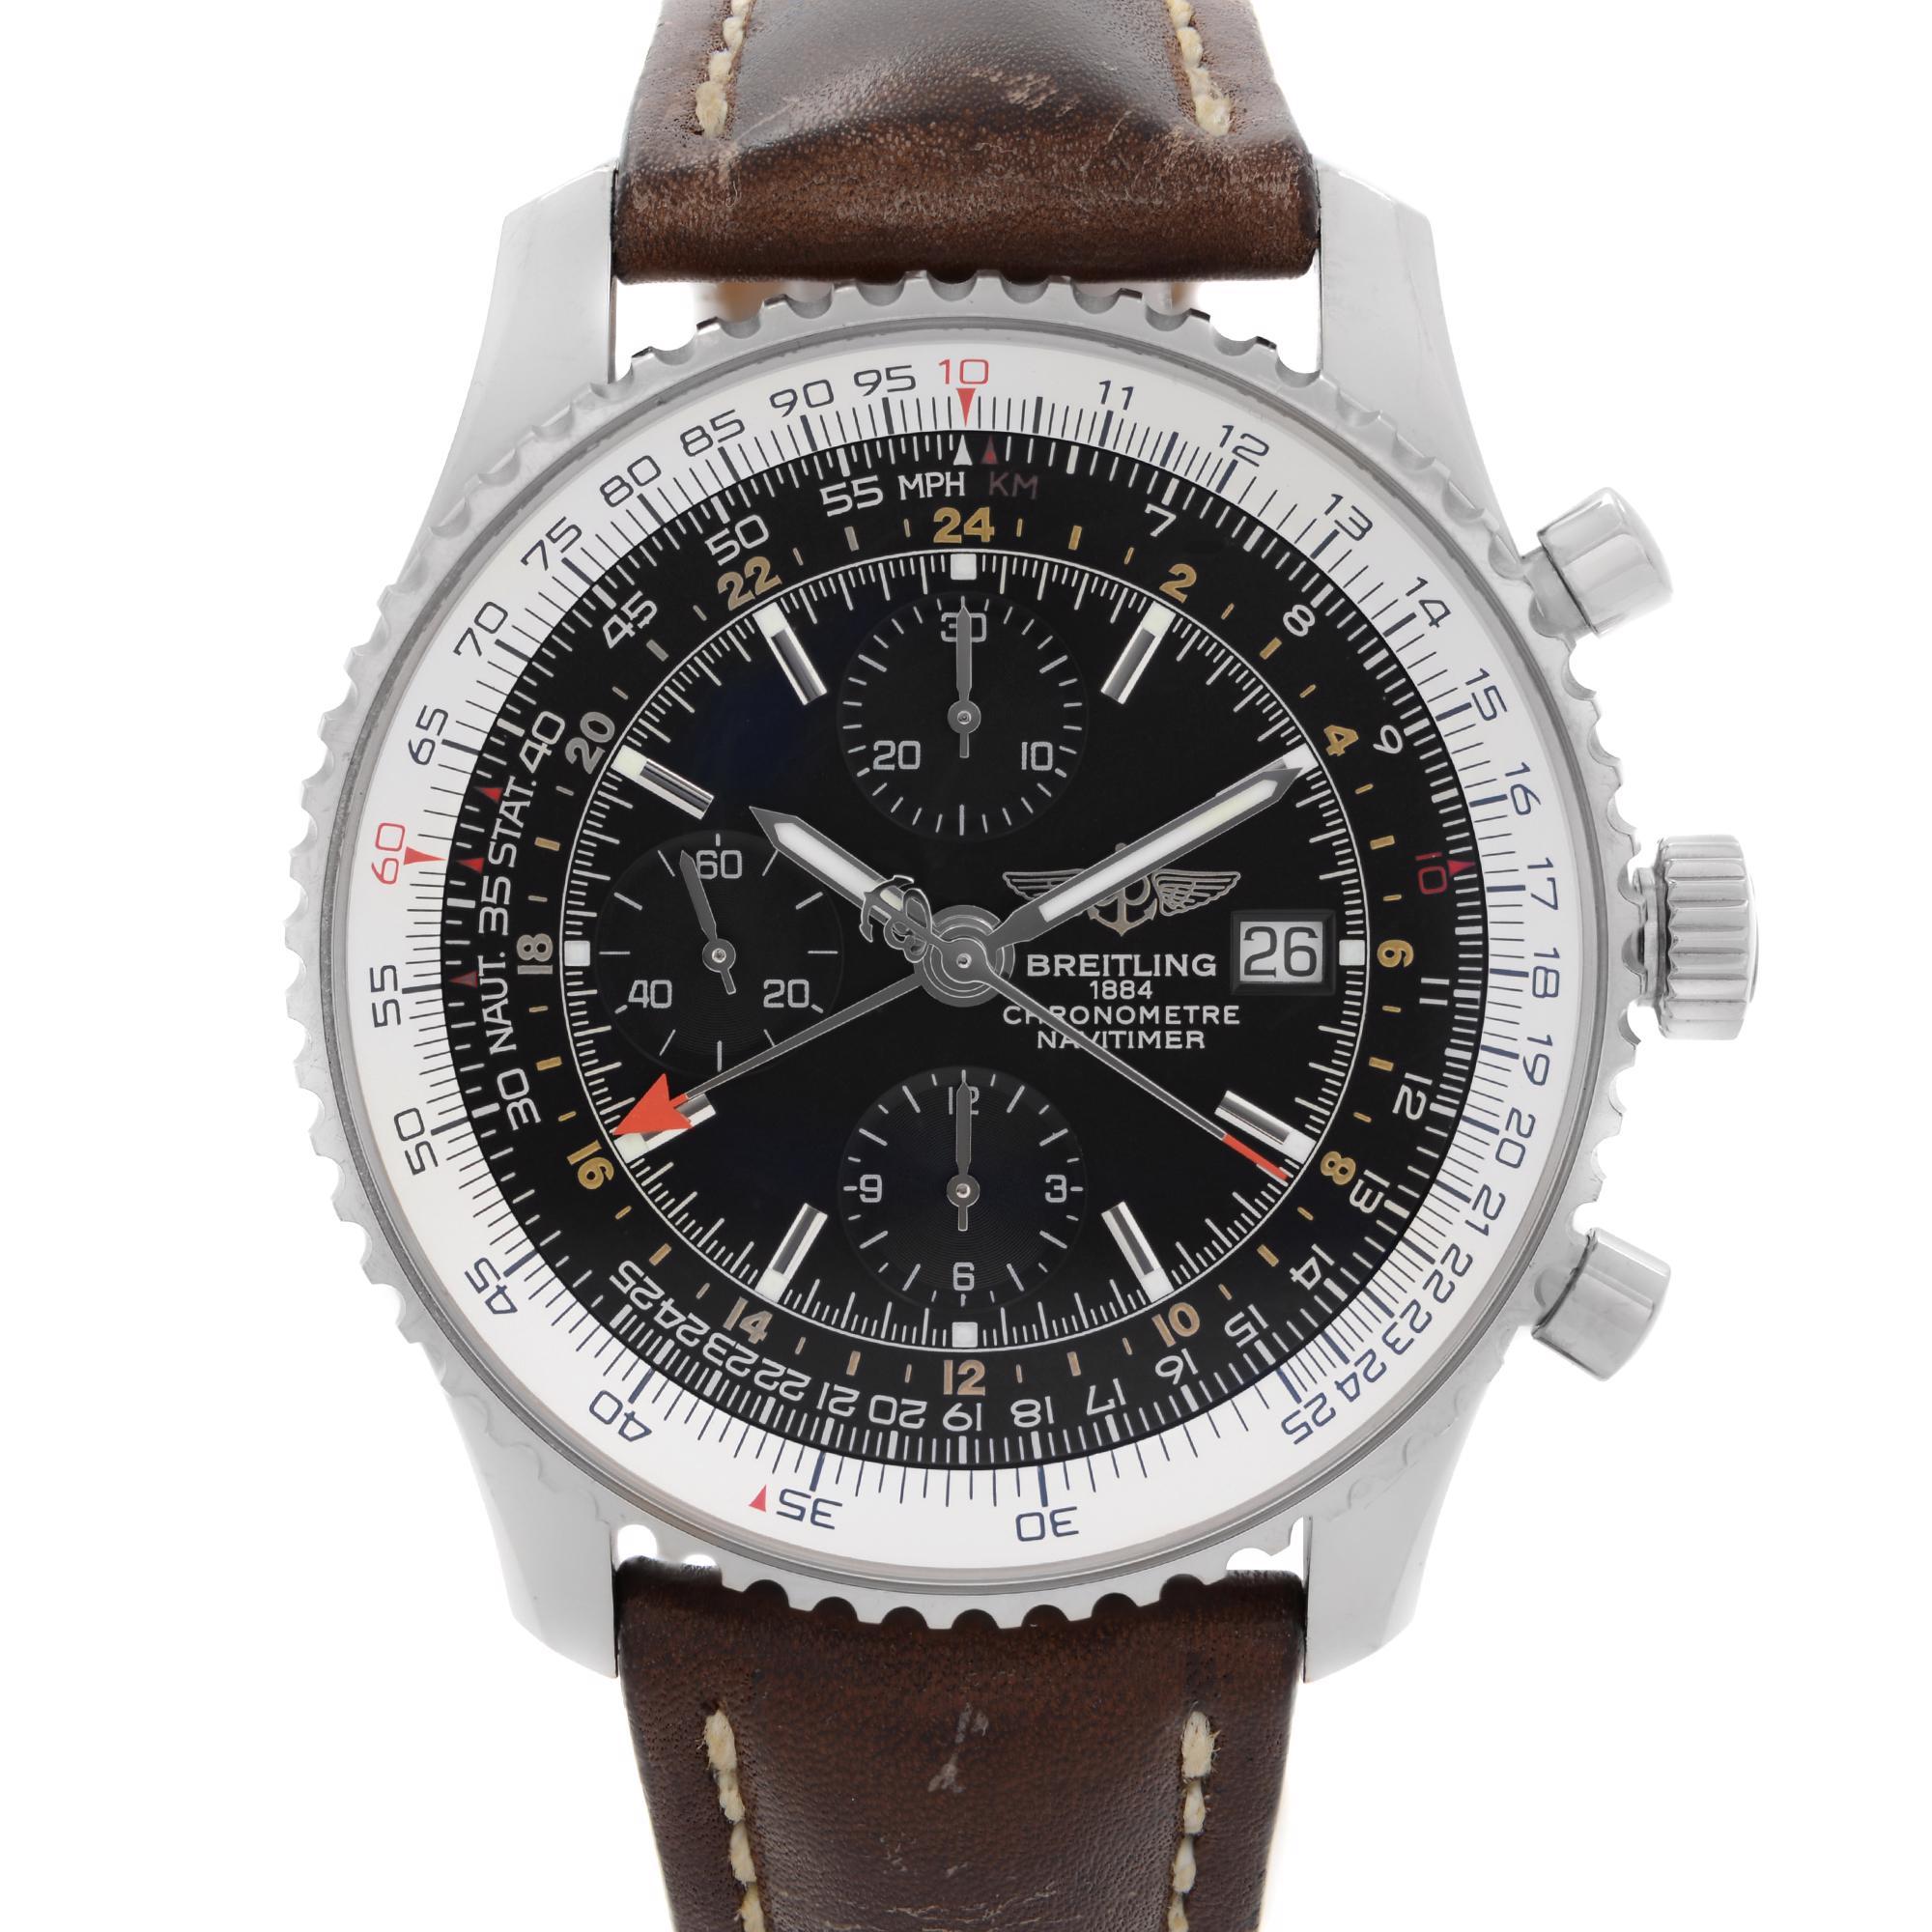 Pre-owned Breitling Navitimer Chronograph GMT Steel Black Dail Automatic Men's Watch A24322. Minor Wrinkles on the Brown Leather Strap. This Beautiful Timepiece is Powered by Mechanical (Automatic) Movement And Features: Round Stainless Steel Case